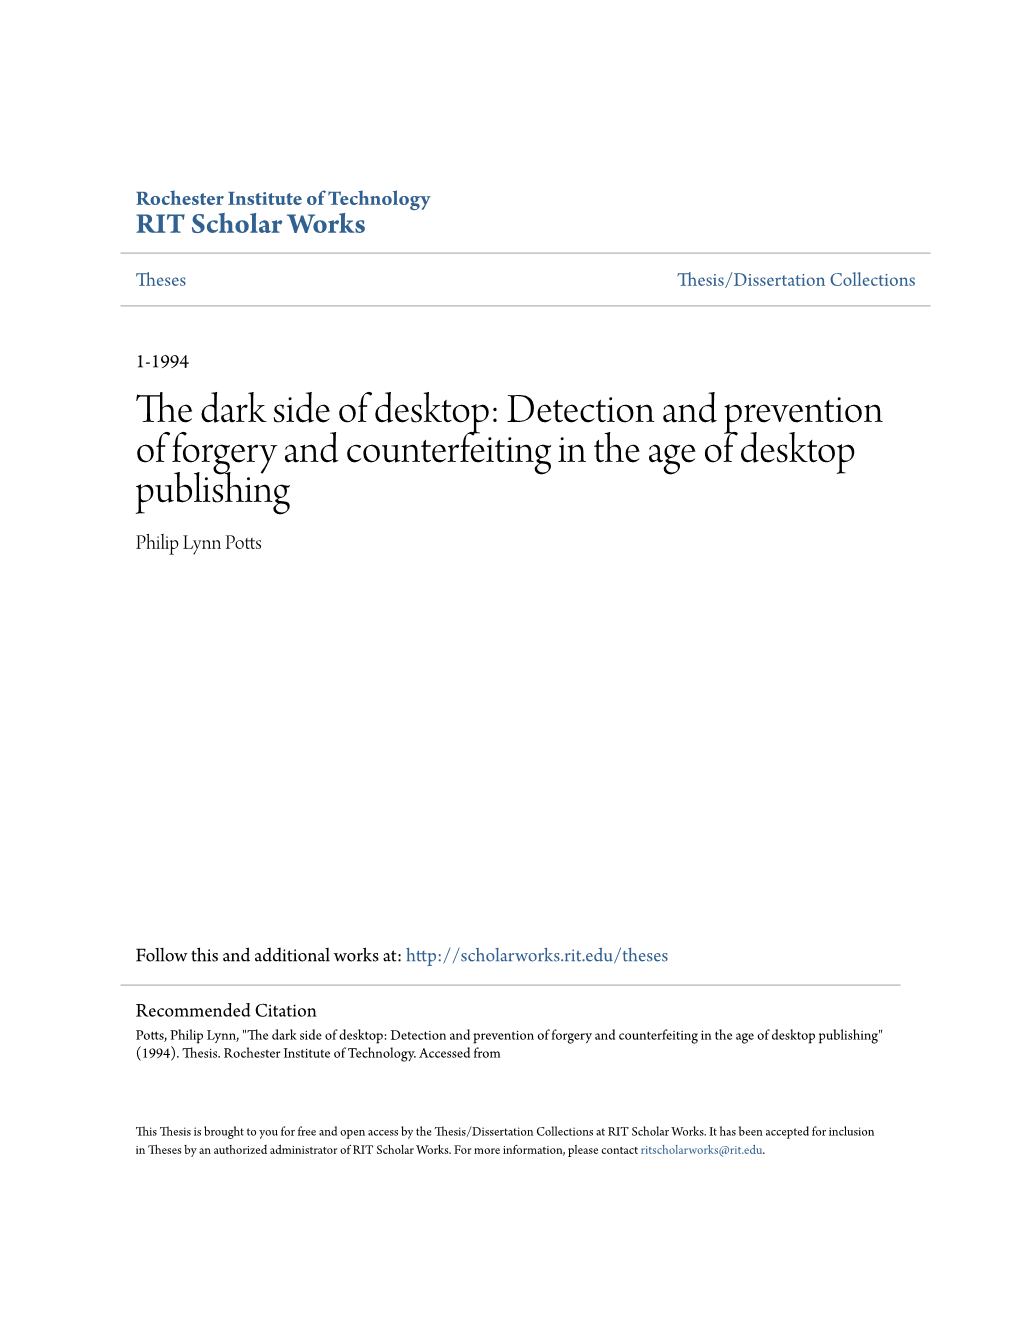 Detection and Prevention of Forgery and Counterfeiting in the Age of Desktop Publishing Philip Lynn Potts